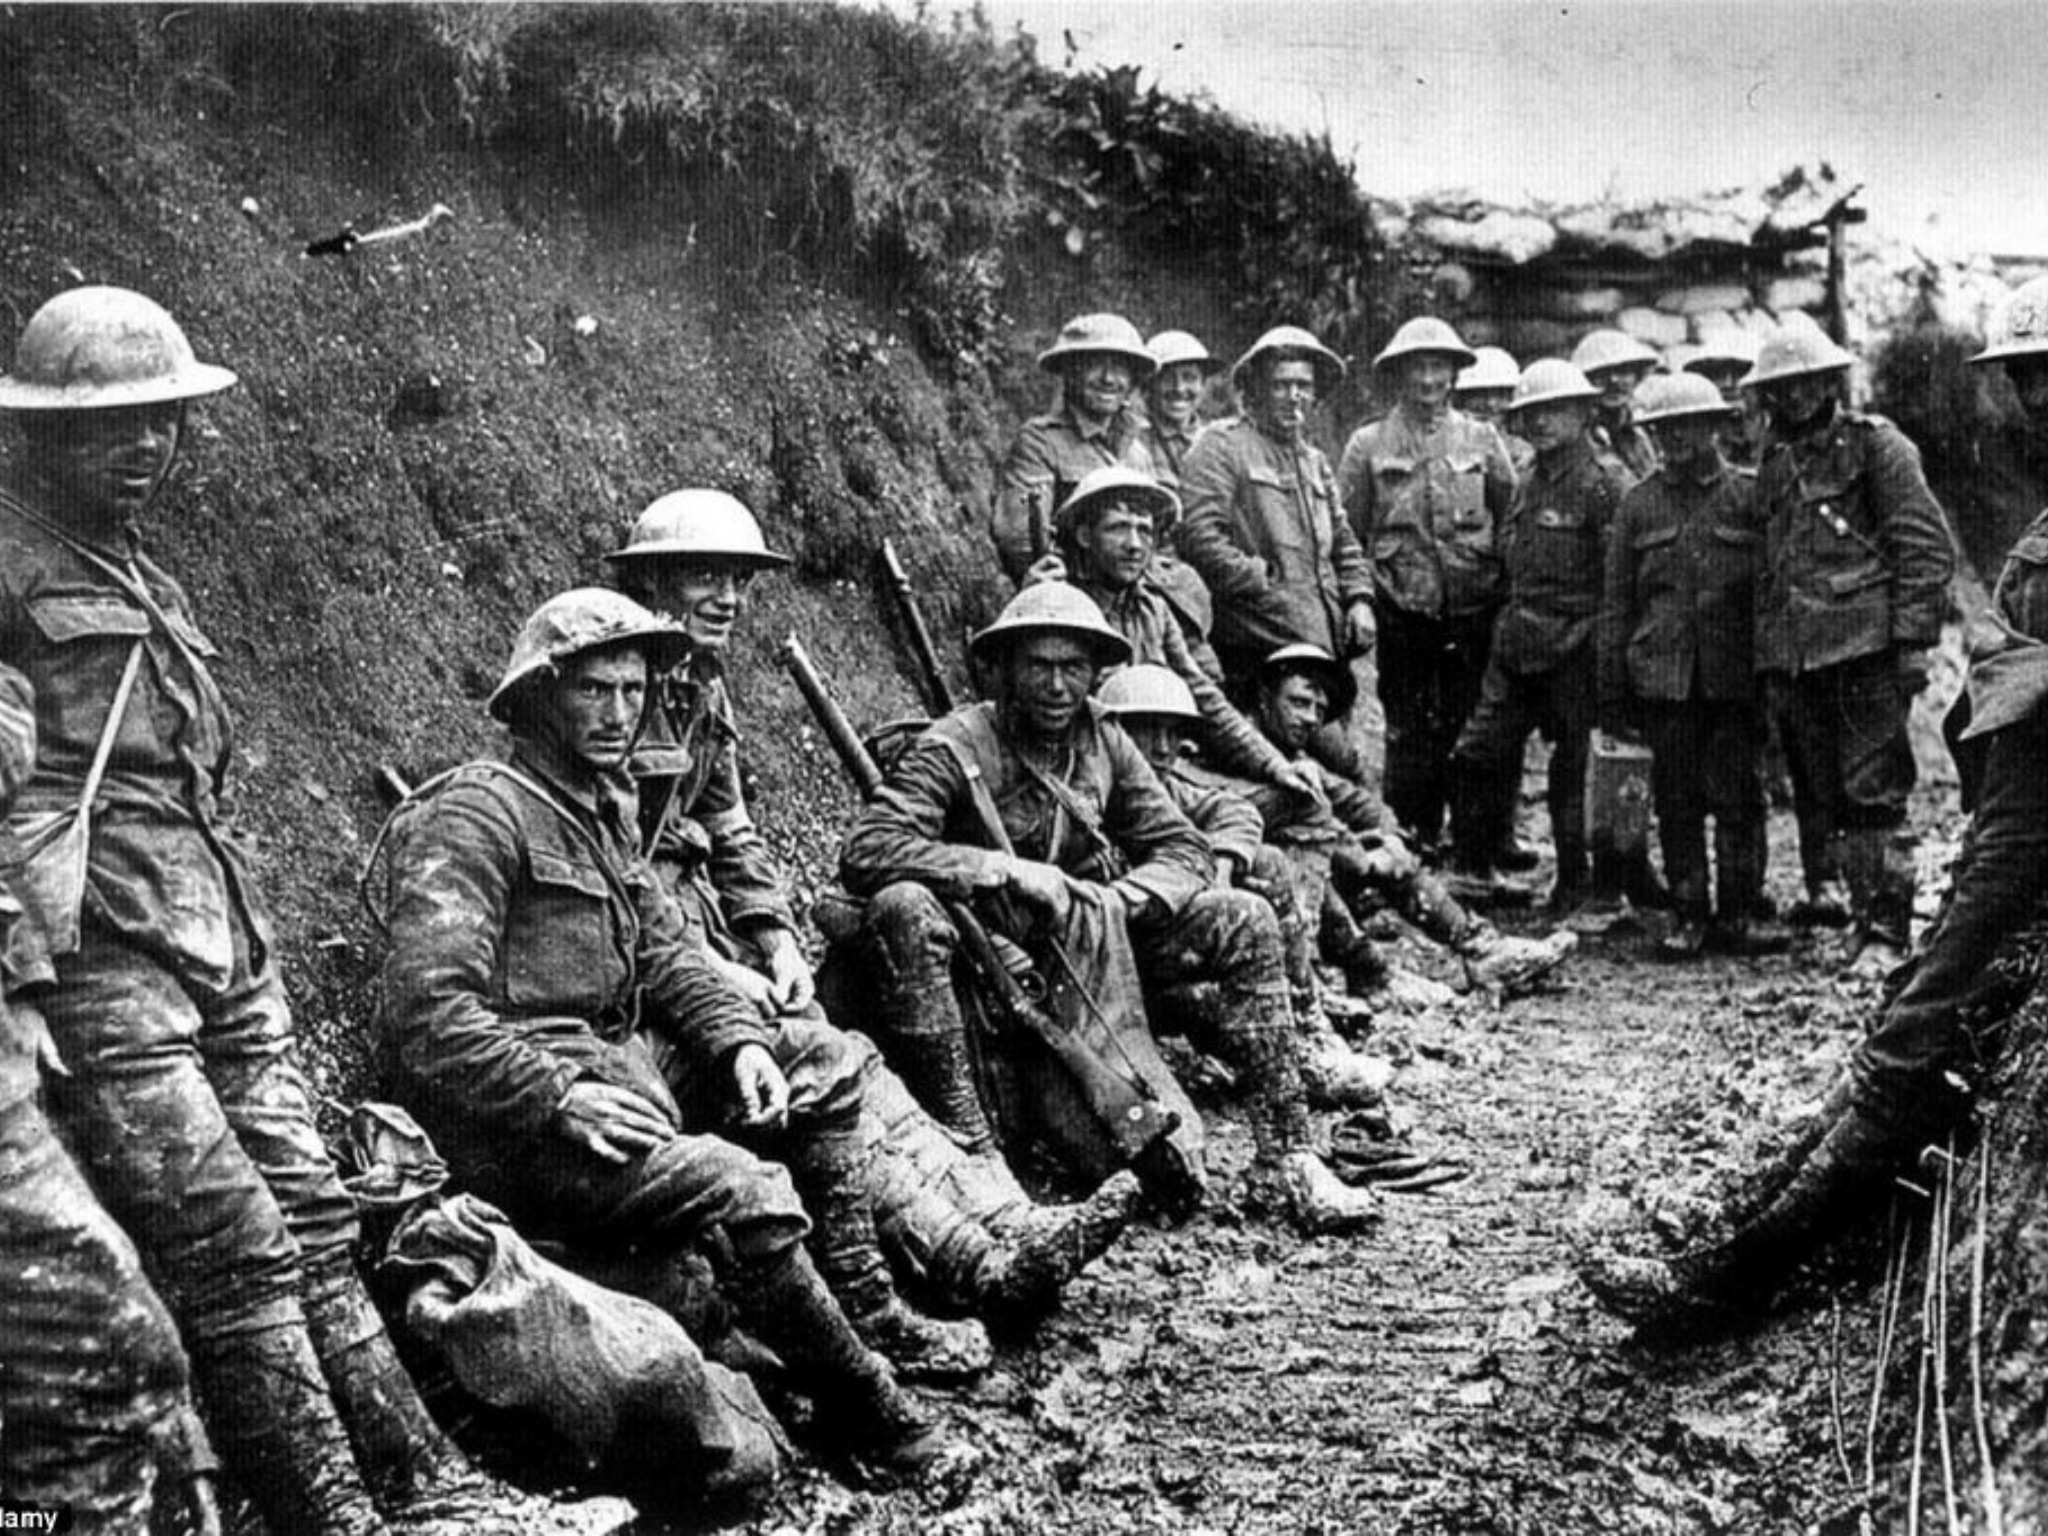 A picture of several soldiers in a trench during WWI